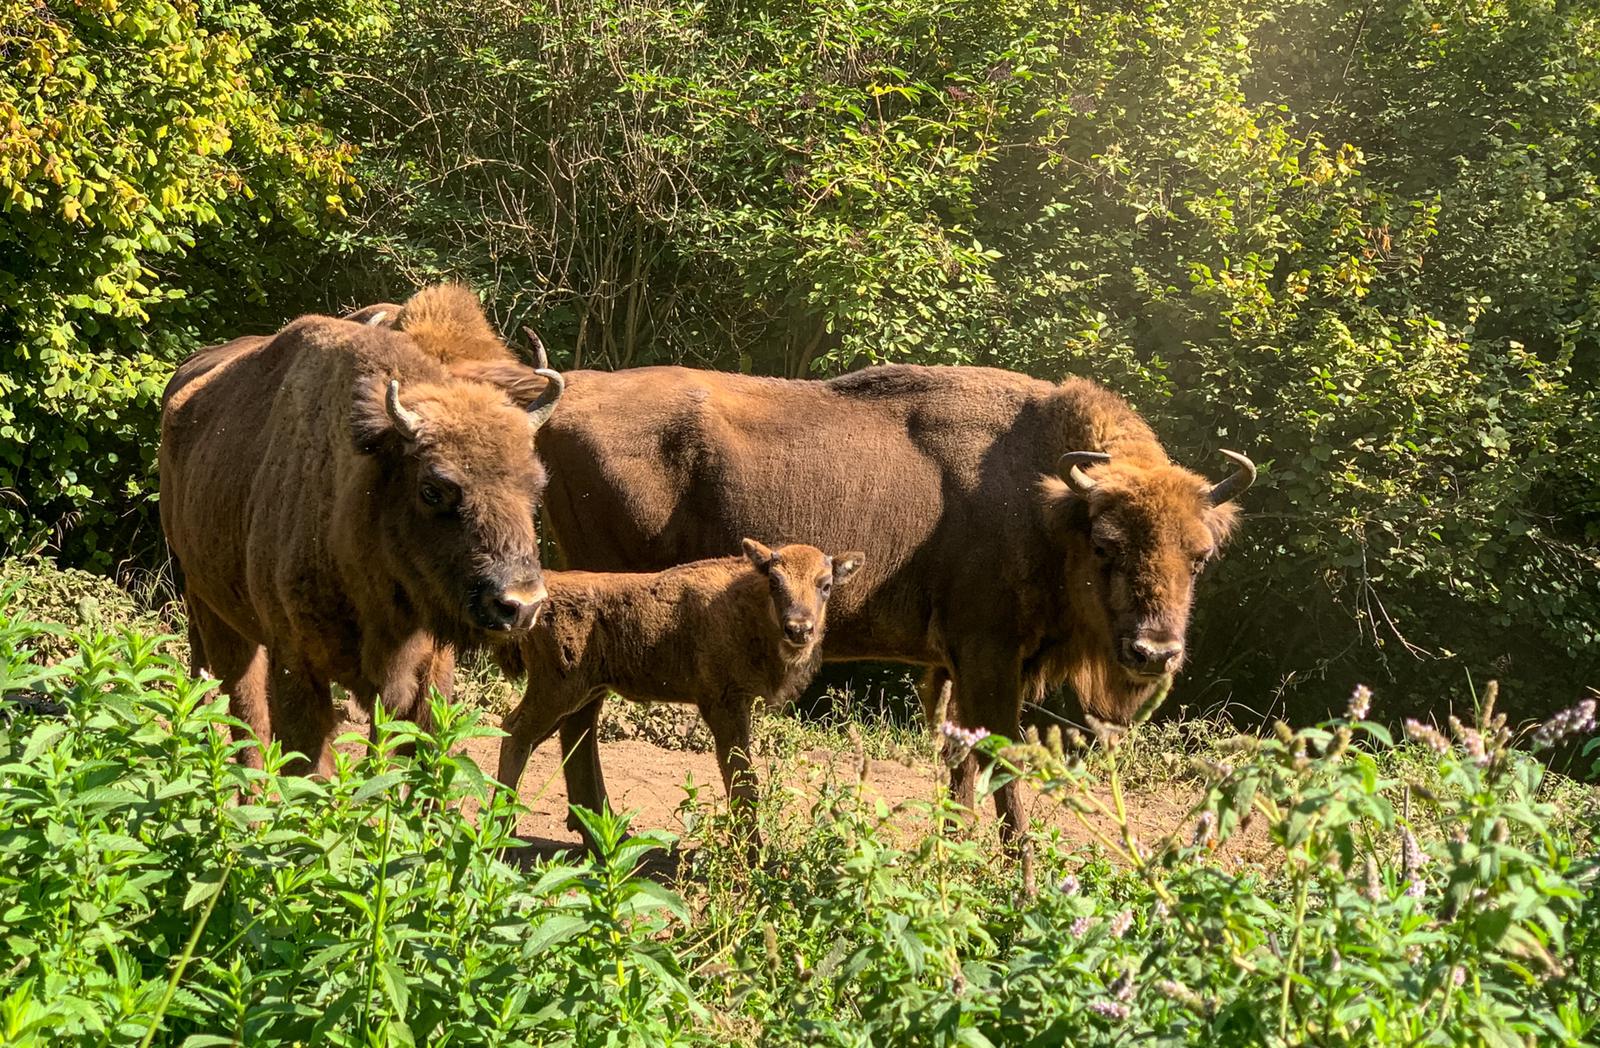 The bison has become a local symbol that has allowed locals to rediscover the richness of nature around them, wonderful landscapes that fascinate tourists in search of adventure experiences in the wild or tranquility in the villages.